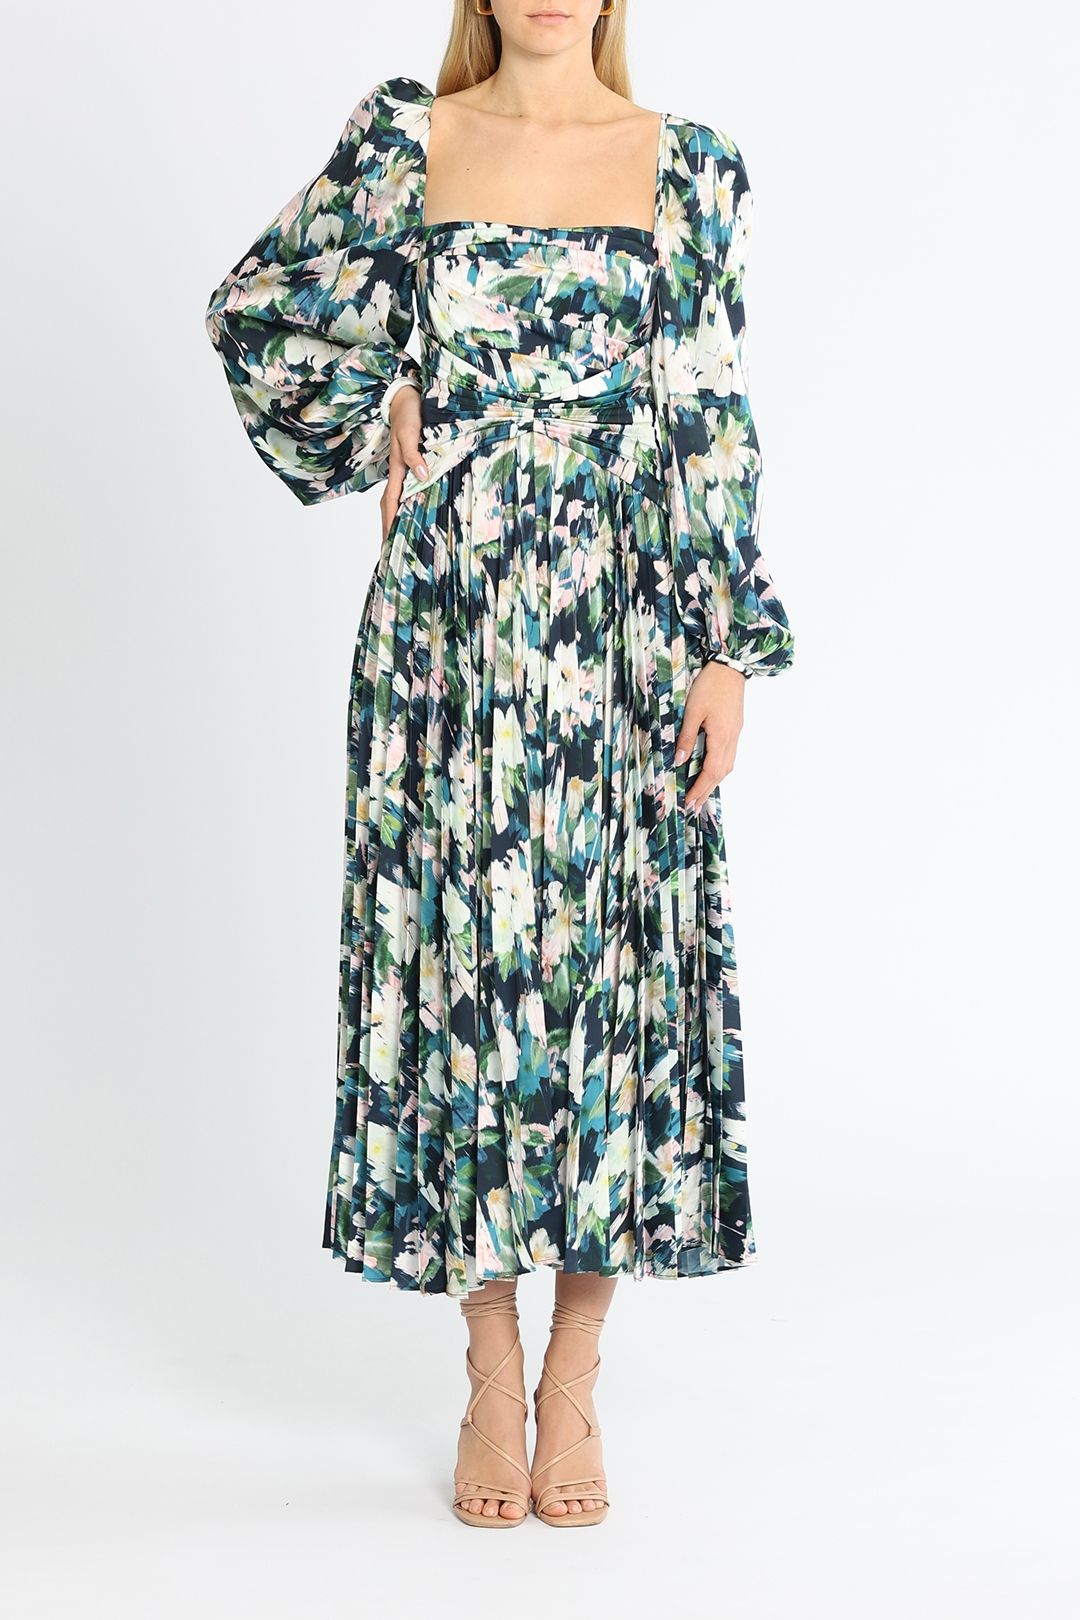 Acler Mattison Dress Navy Posey Floral